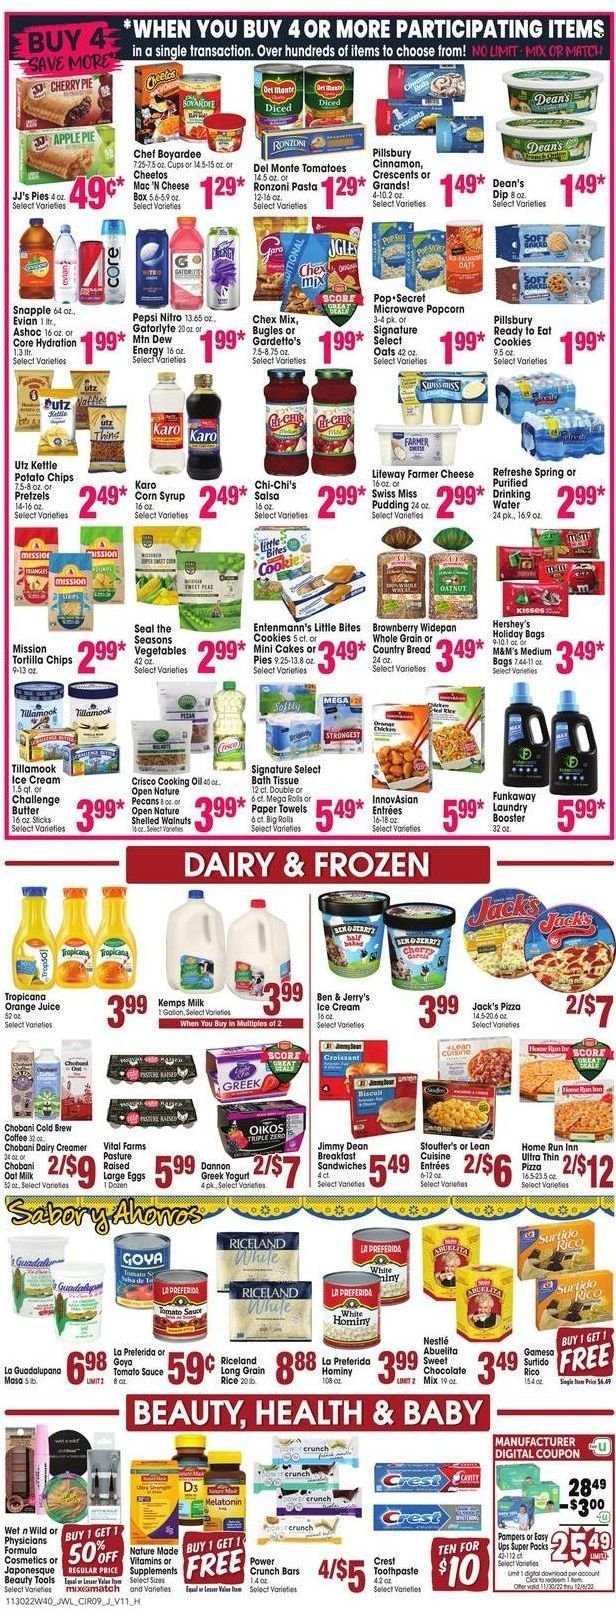 thumbnail - Jewel Osco Flyer - 11/30/2022 - 12/06/2022 - Sales products - bread, pretzels, cake, pie, apple pie, Entenmann's, cherry pie, corn, pizza, pasta, sauce, Pillsbury, Lean Cuisine, Jimmy Dean, farmer cheese, Kemps, greek yoghurt, pudding, yoghurt, Oikos, Chobani, Dannon, Swiss Miss, milk, oat milk, large eggs, butter, creamer, dip, ice cream, Hershey's, Ben & Jerry's, Stouffer's, cookies, Nestlé, M&M's, biscuit, Little Bites, tortilla chips, potato chips, Cheetos, Thins, popcorn, Chex Mix, Crisco, tomato sauce, Goya, Chef Boyardee, Del Monte, rice, long grain rice, cinnamon, salsa, oil, cooking oil, corn syrup, syrup, almonds, walnuts, pecans, Mountain Dew, Pepsi, orange juice, juice, Snapple, purified water, Evian, coffee, Sol, Pampers, bath tissue, kitchen towels, paper towels, toothpaste, Crest, cup, holiday bag, Melatonin, Nature Made, vitamin D3. Page 8.